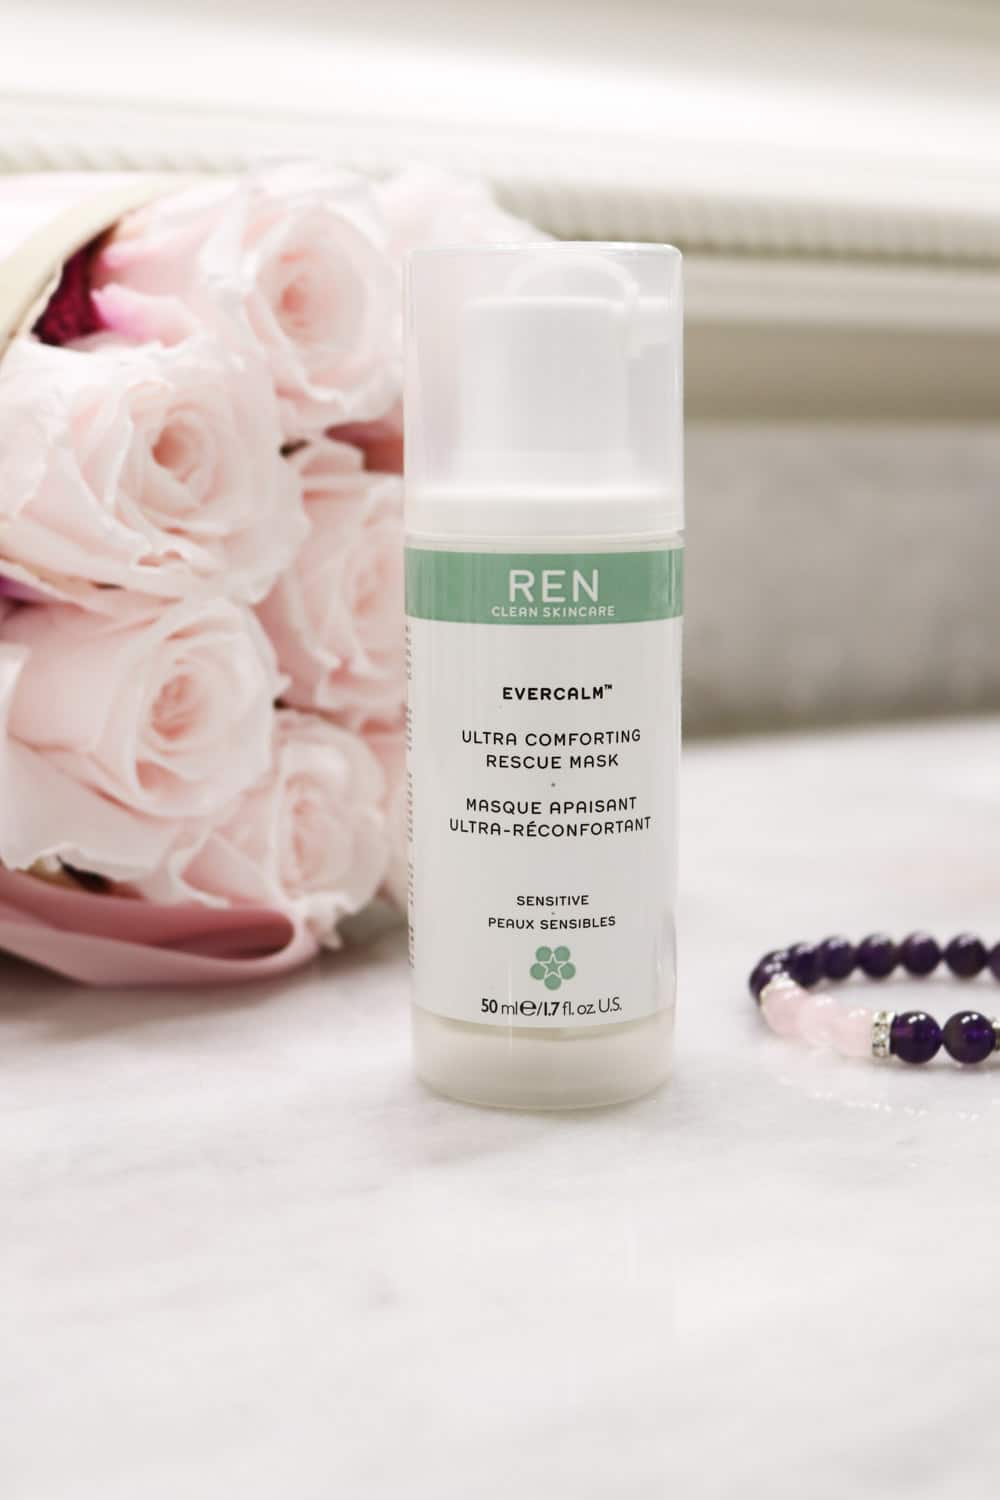 ren evercalm ultra comforting mask review